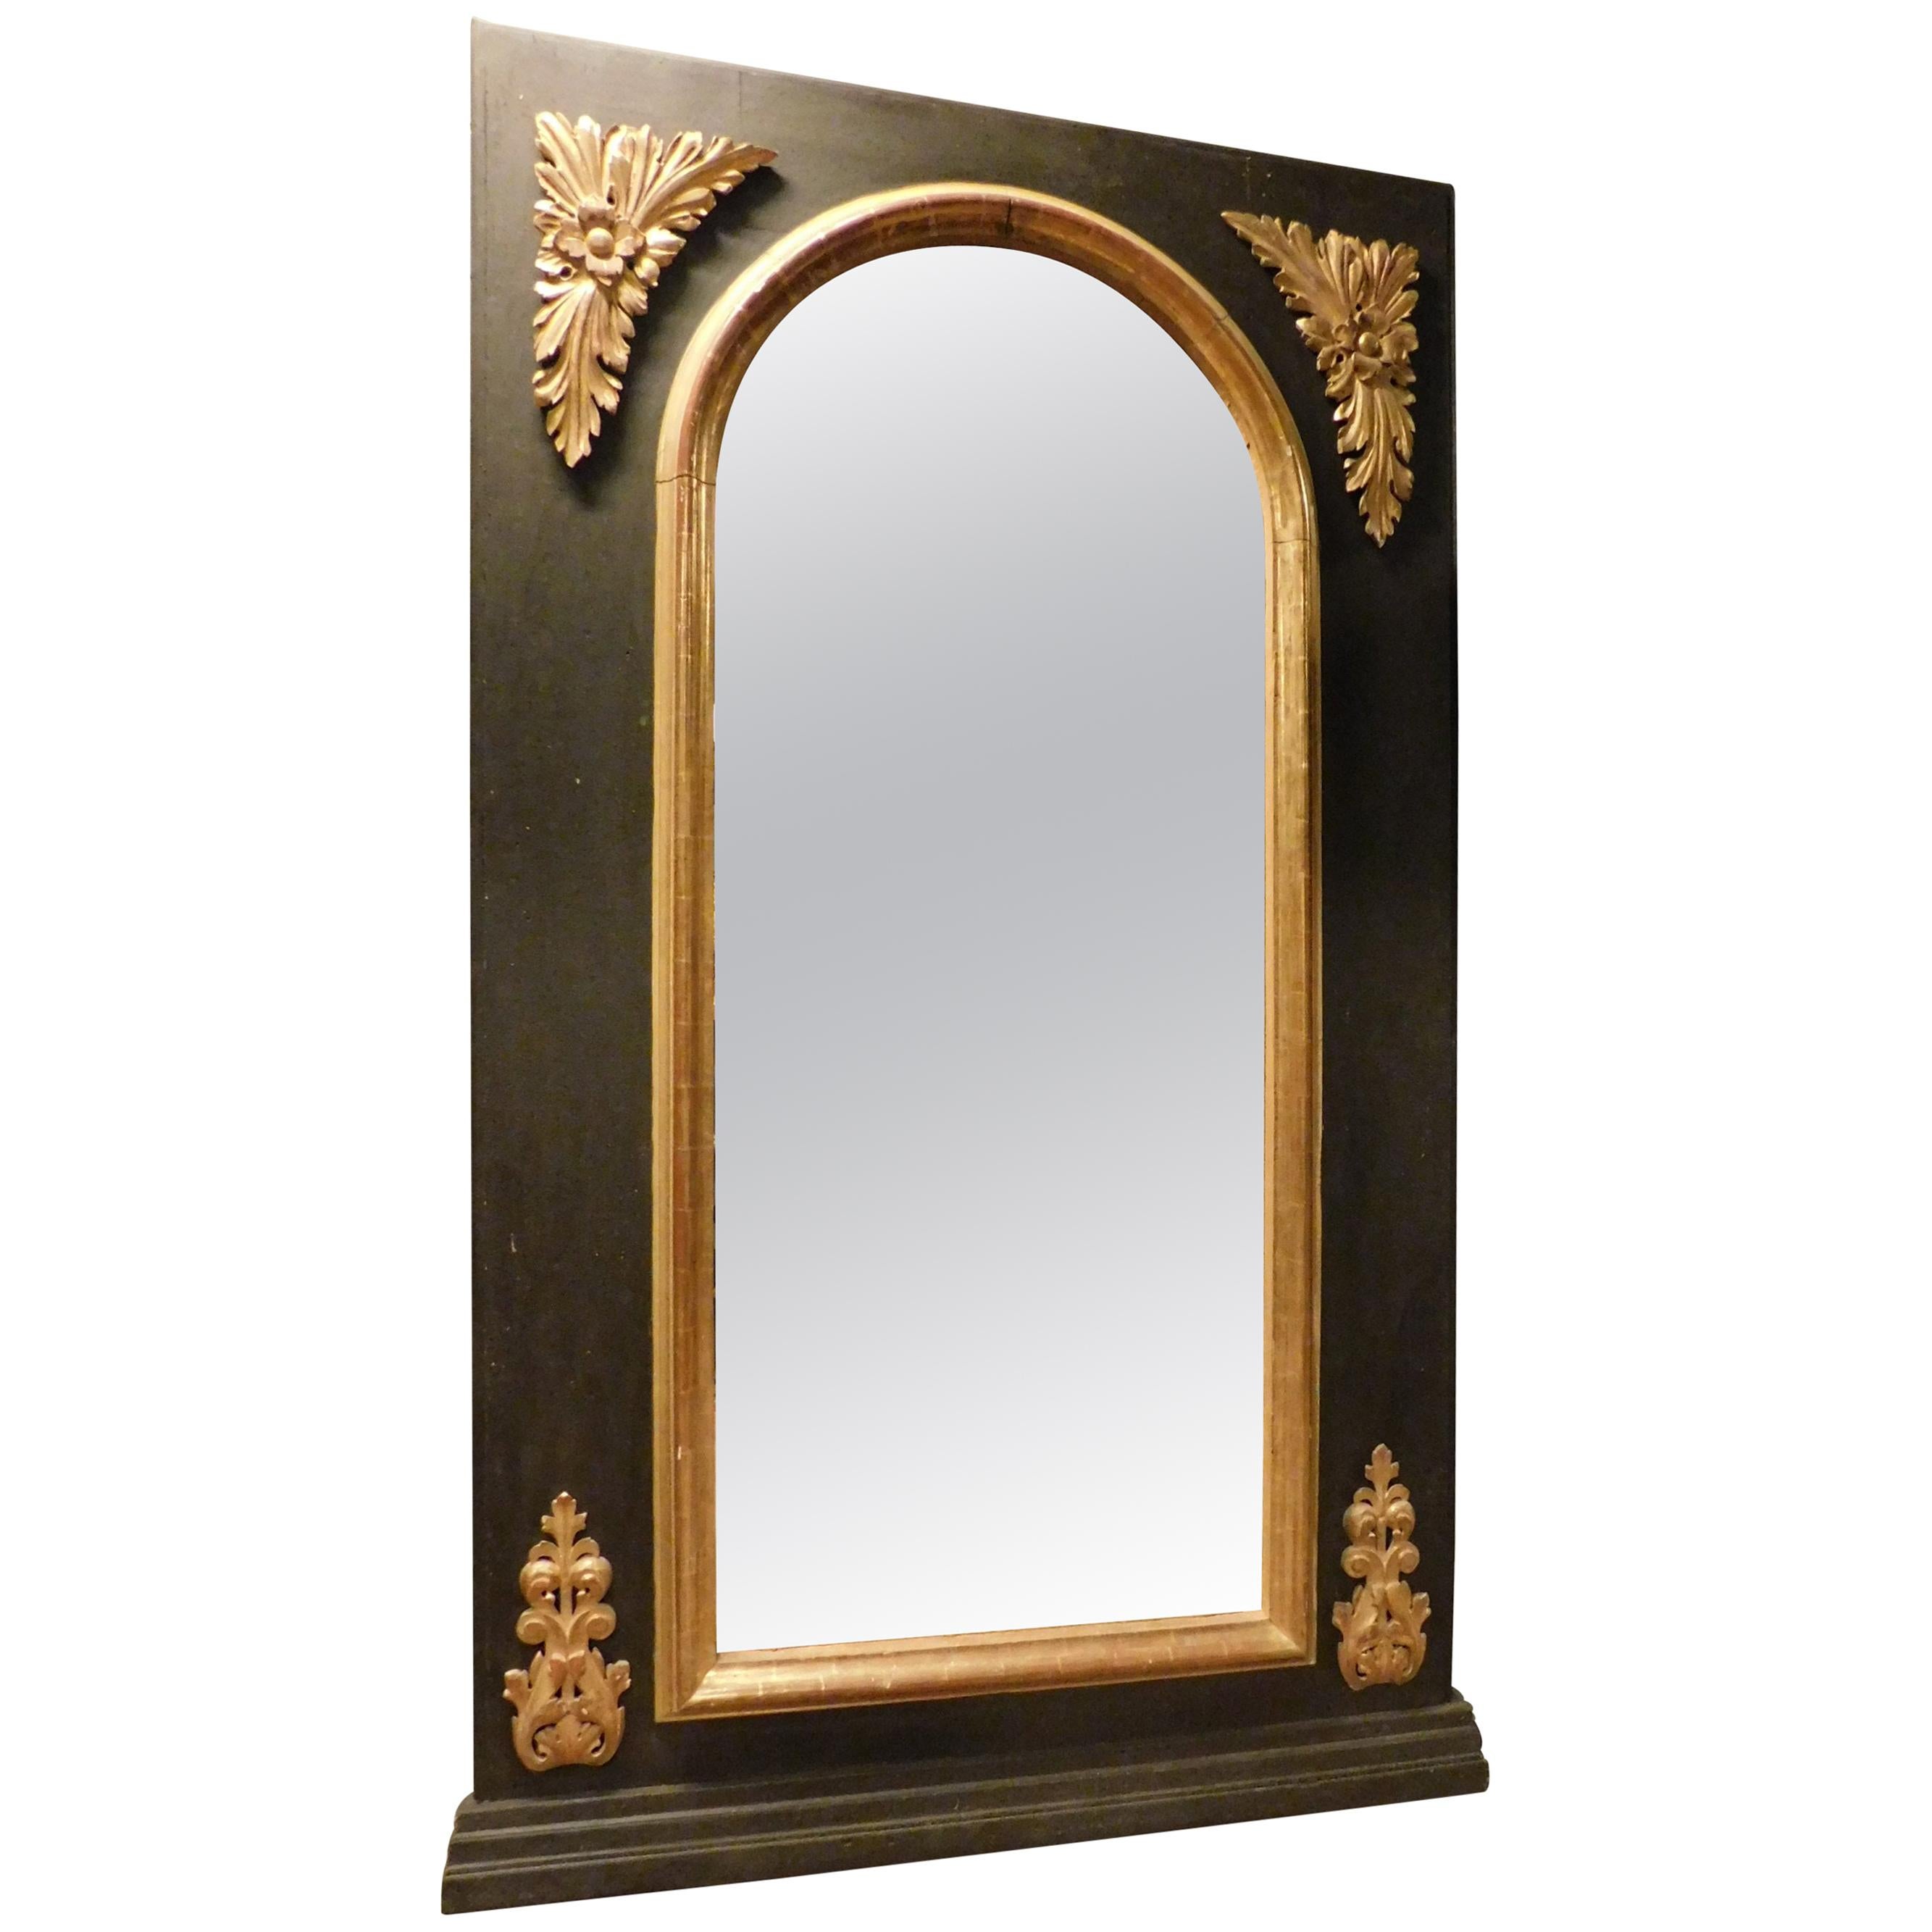 Antique Black Lacquered Mirror, with Golden Decorations, 1800, Italy